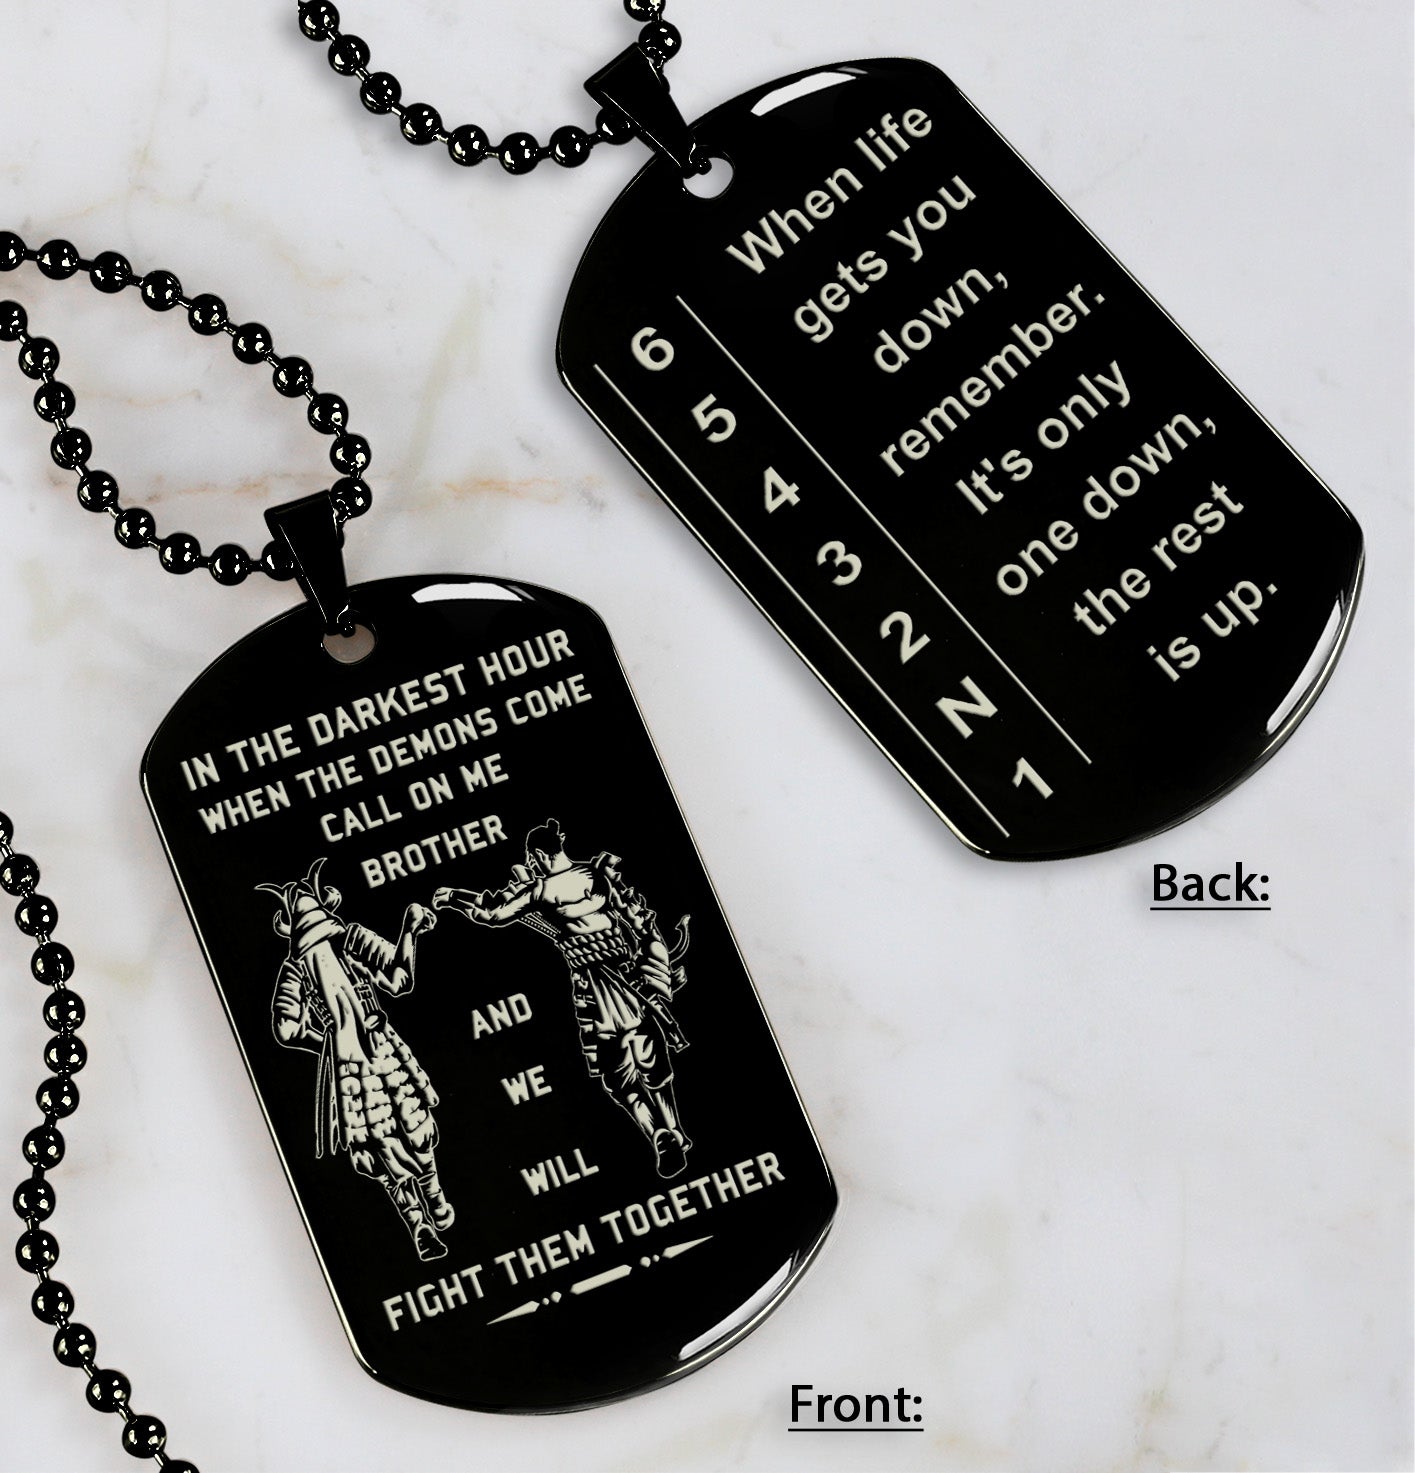 Samurai and Biker double side dog tag bracelet When life gets you down call on me brother